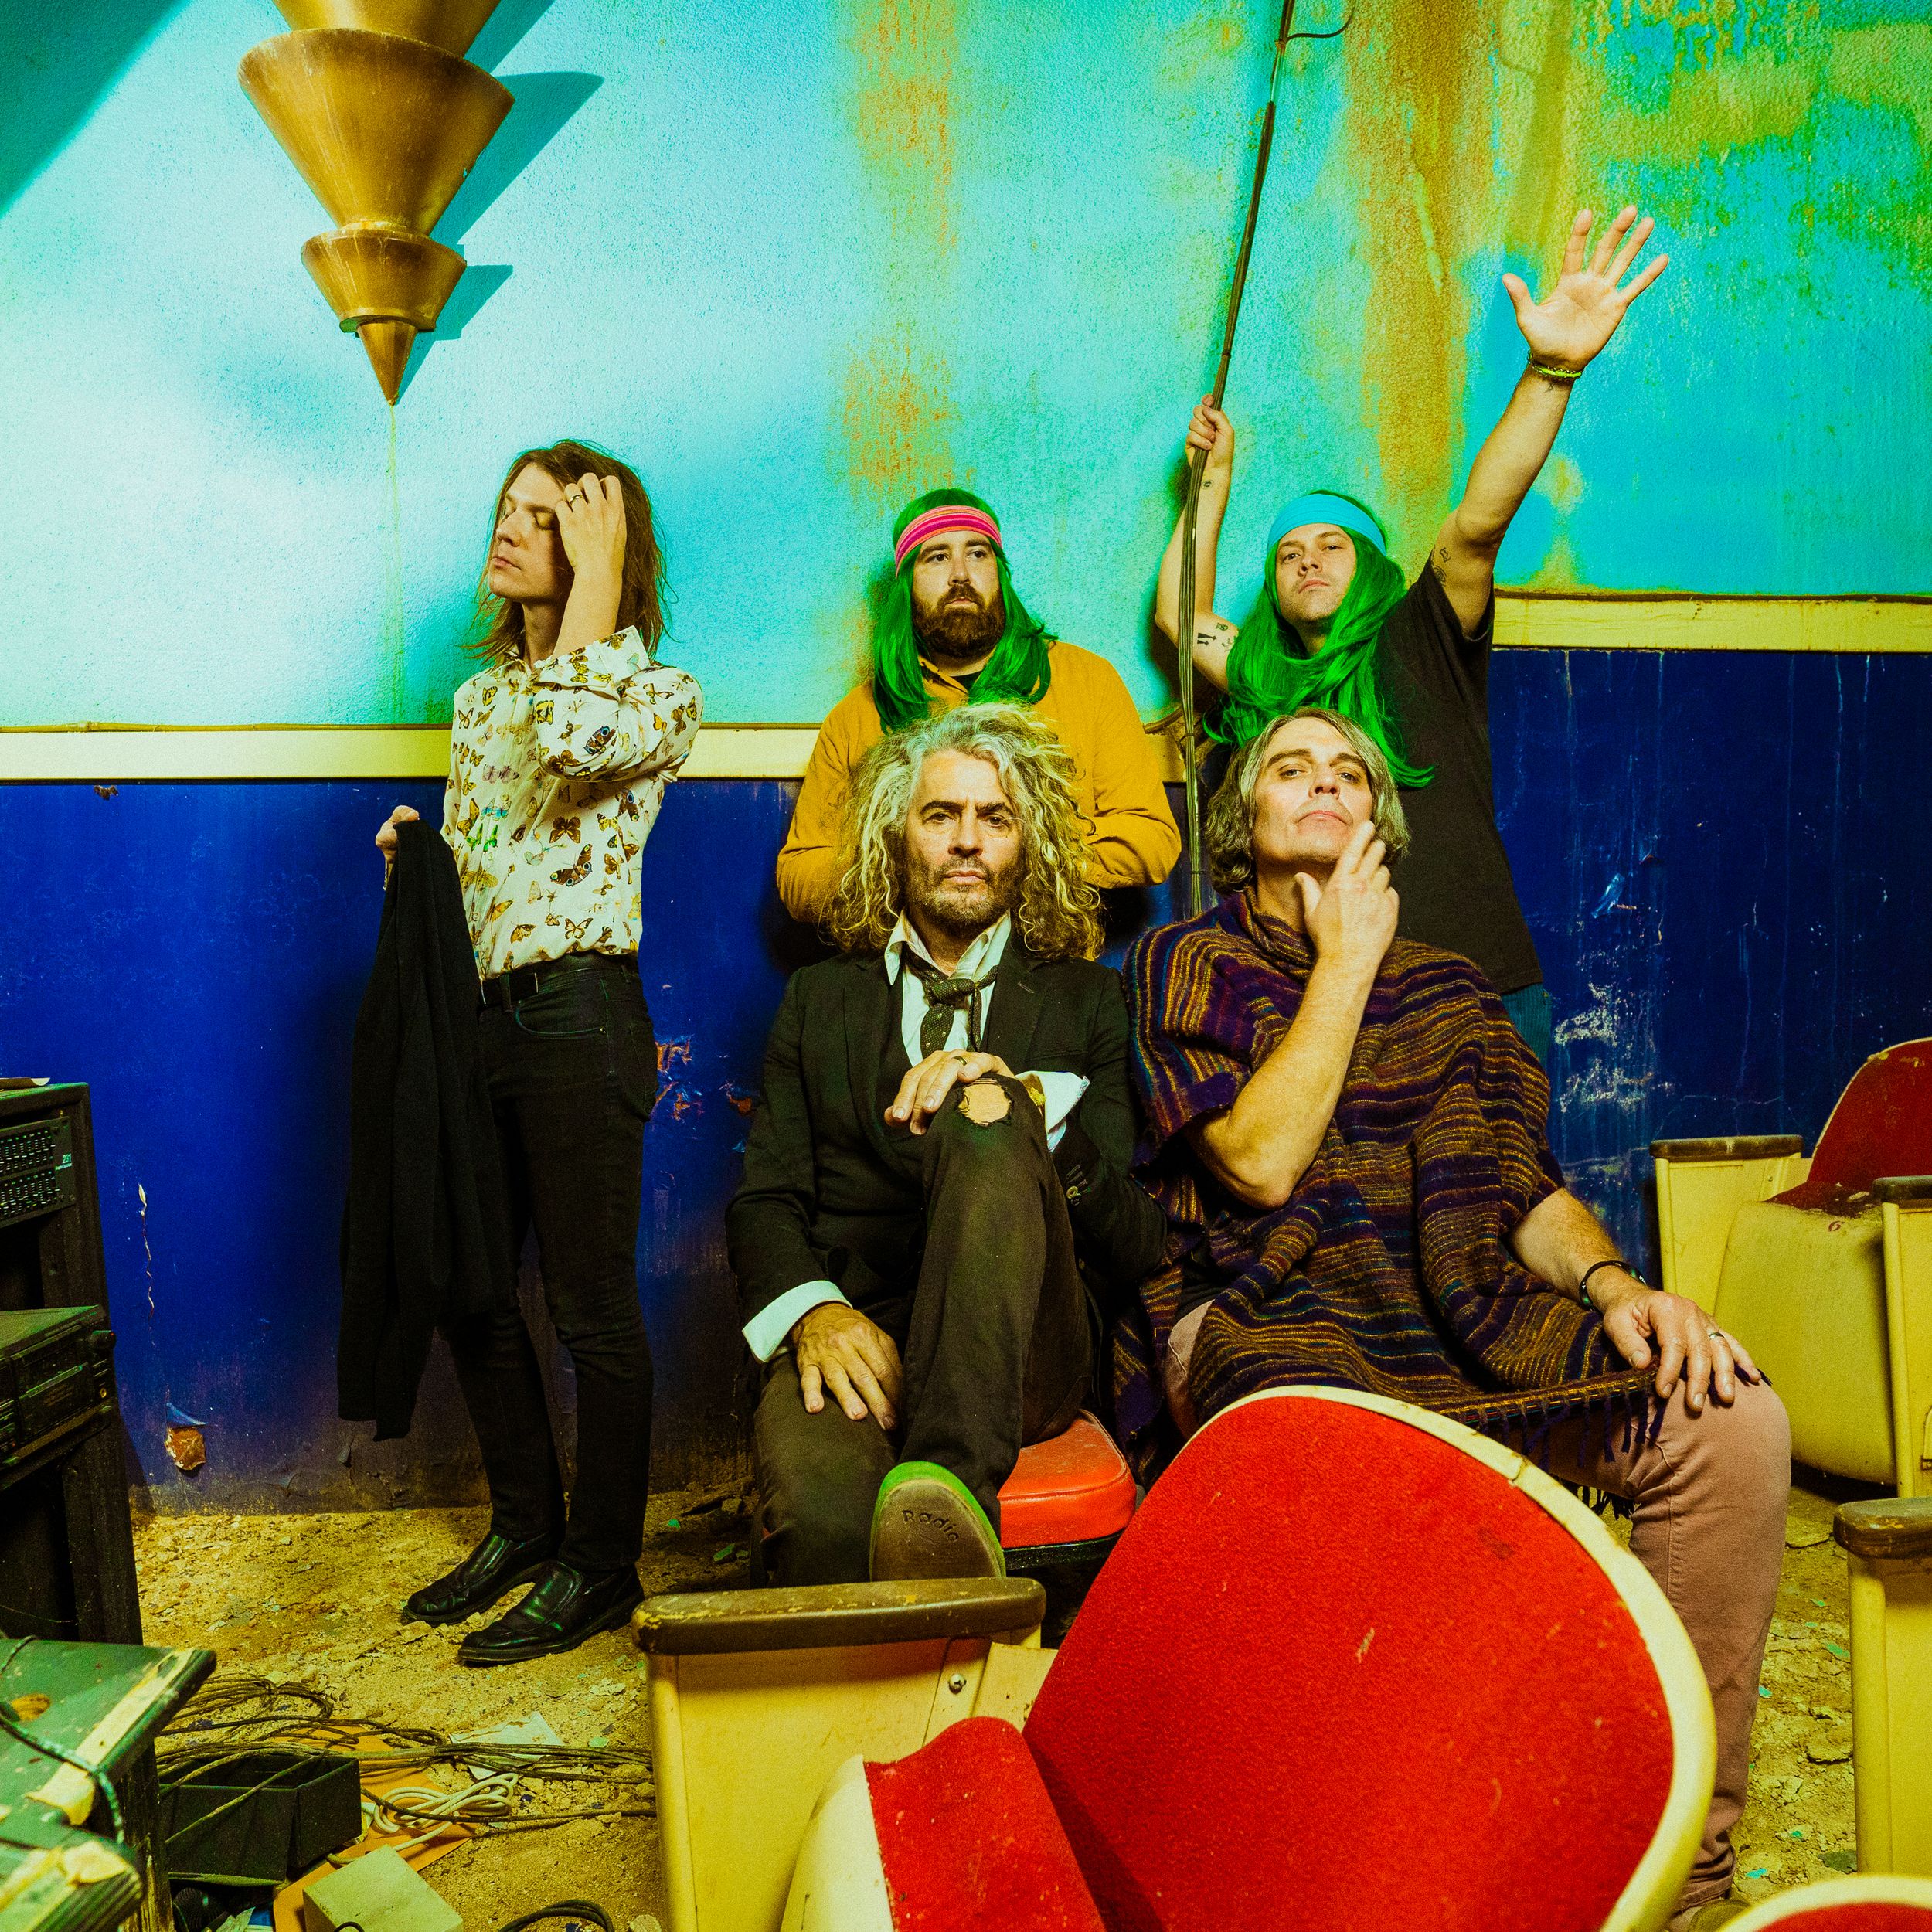 Avant rockers The Flaming Lips return to the Knitting Factory with